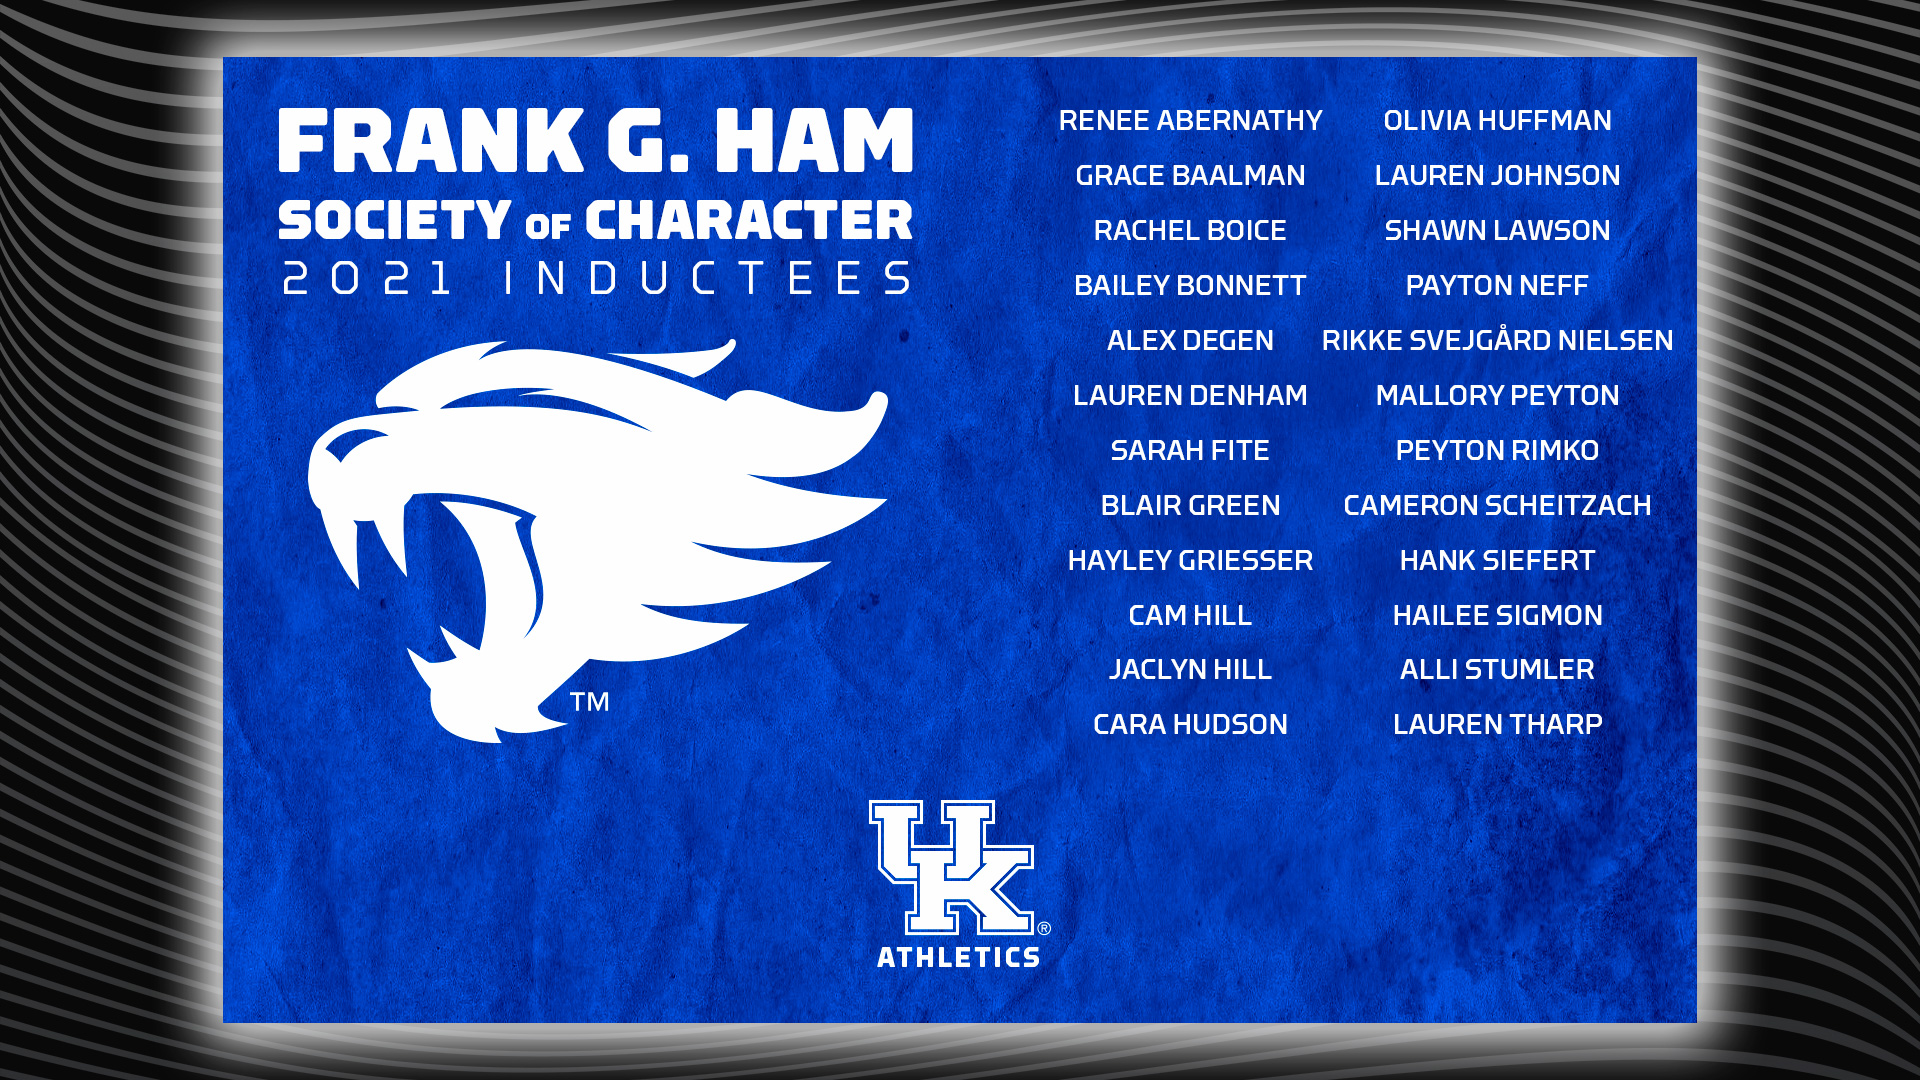 24 Wildcats to be Inducted into Frank G. Ham Society of Character